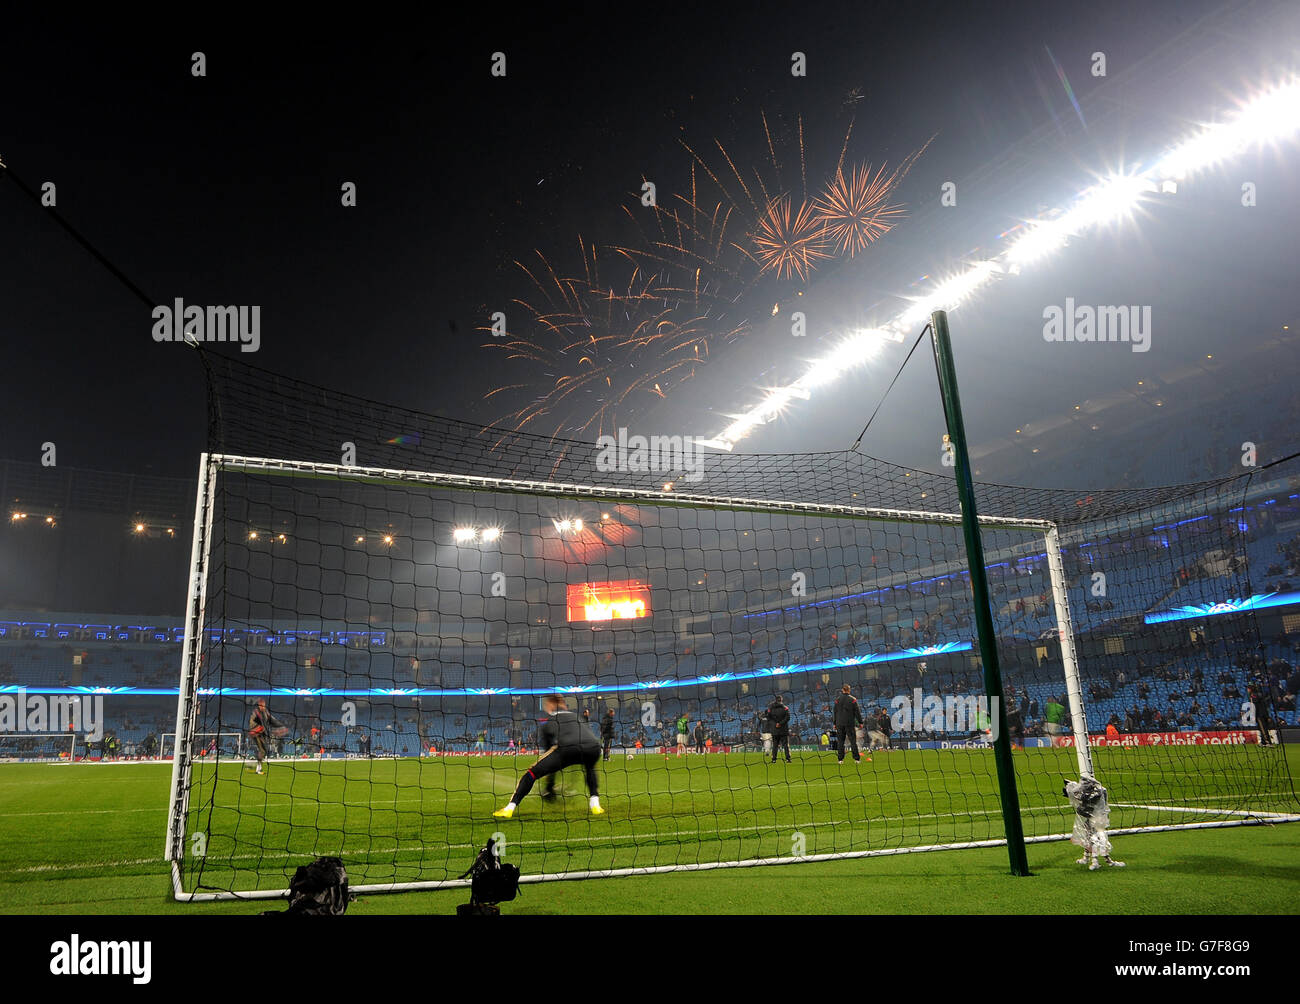 Fireworks are set off above the Etihad Stadium to mark Guy Fawkes Day during the warm up before the UEFA Champions League Group E match at the Etihad Stadium, Manchester. PRESS ASSOCIATION Photo. Picture date: Wednesday November 5, 2014. See PA story SOCCER Man City. Photo credit should read: Martin Rickett/PA Wire Stock Photo